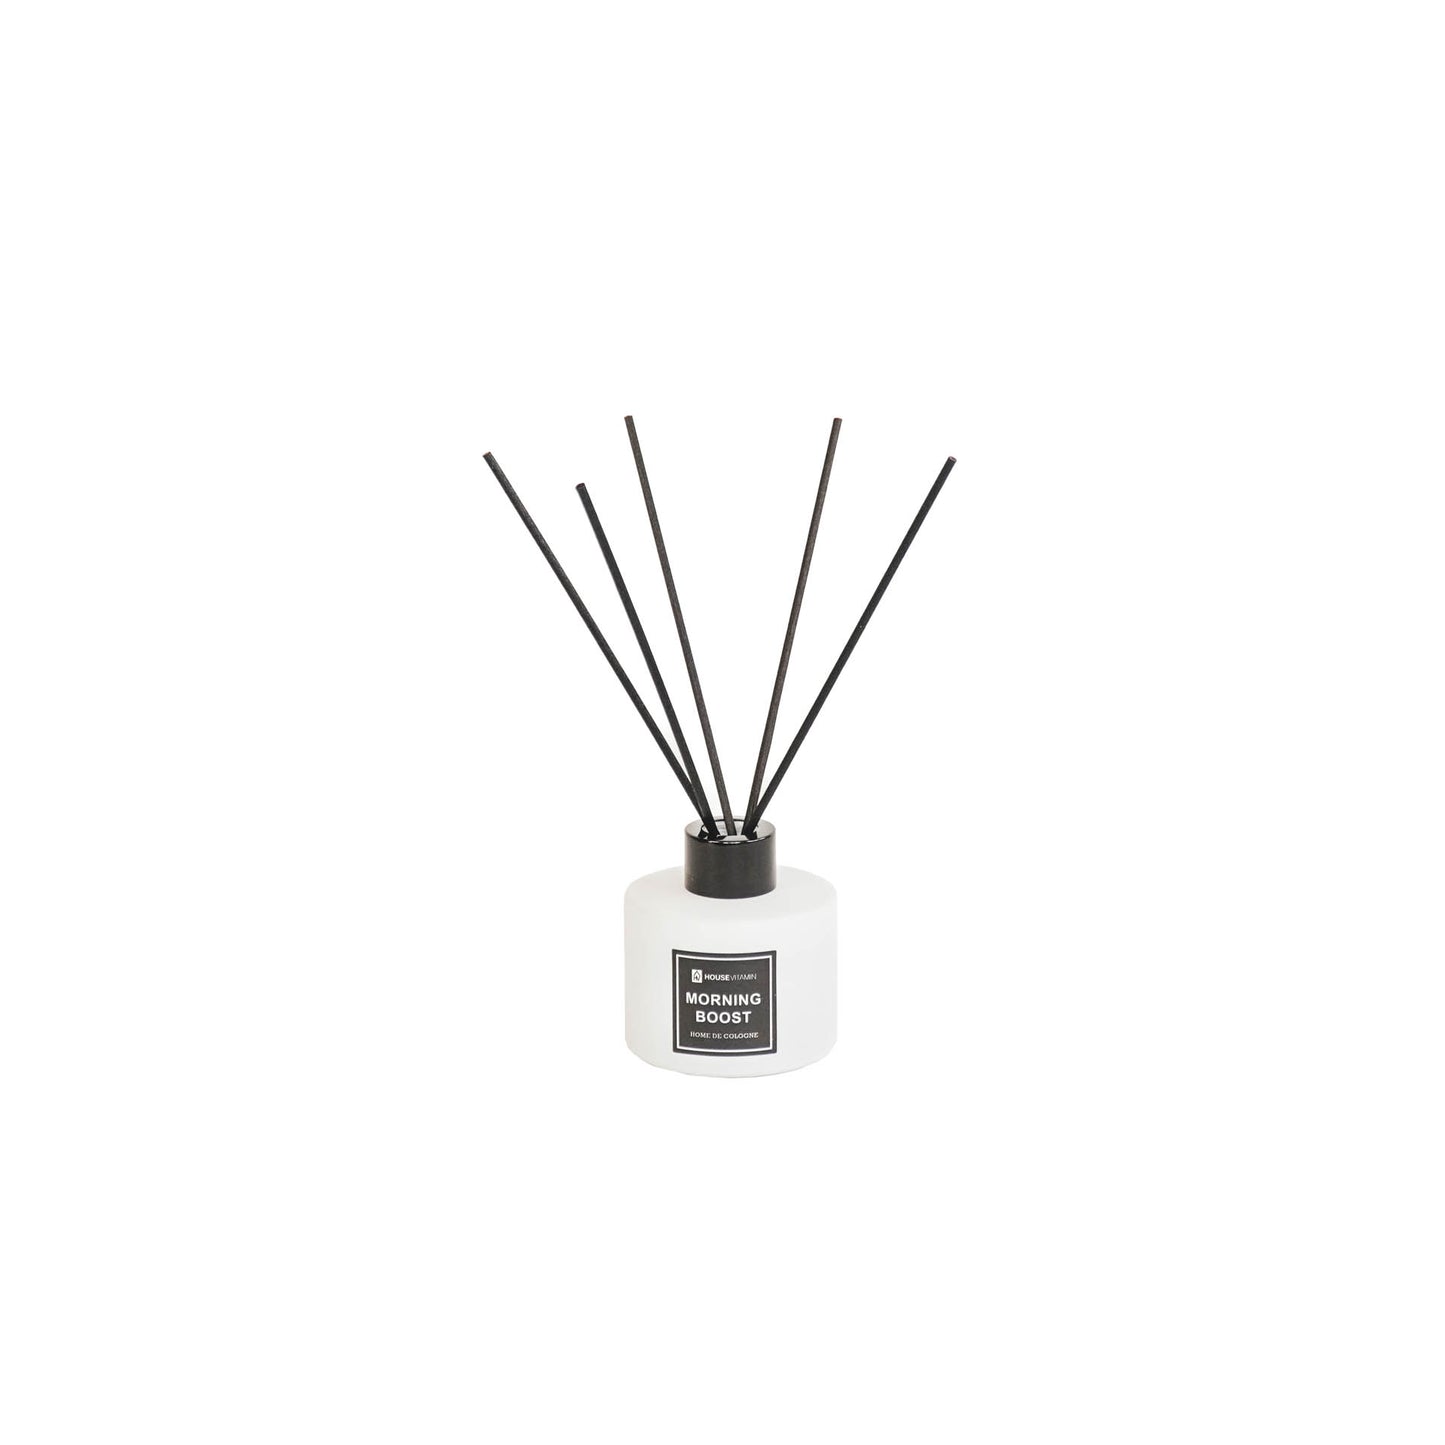 HV Home de Cologne Reed Diffusers - 100 ml - Morning Boost